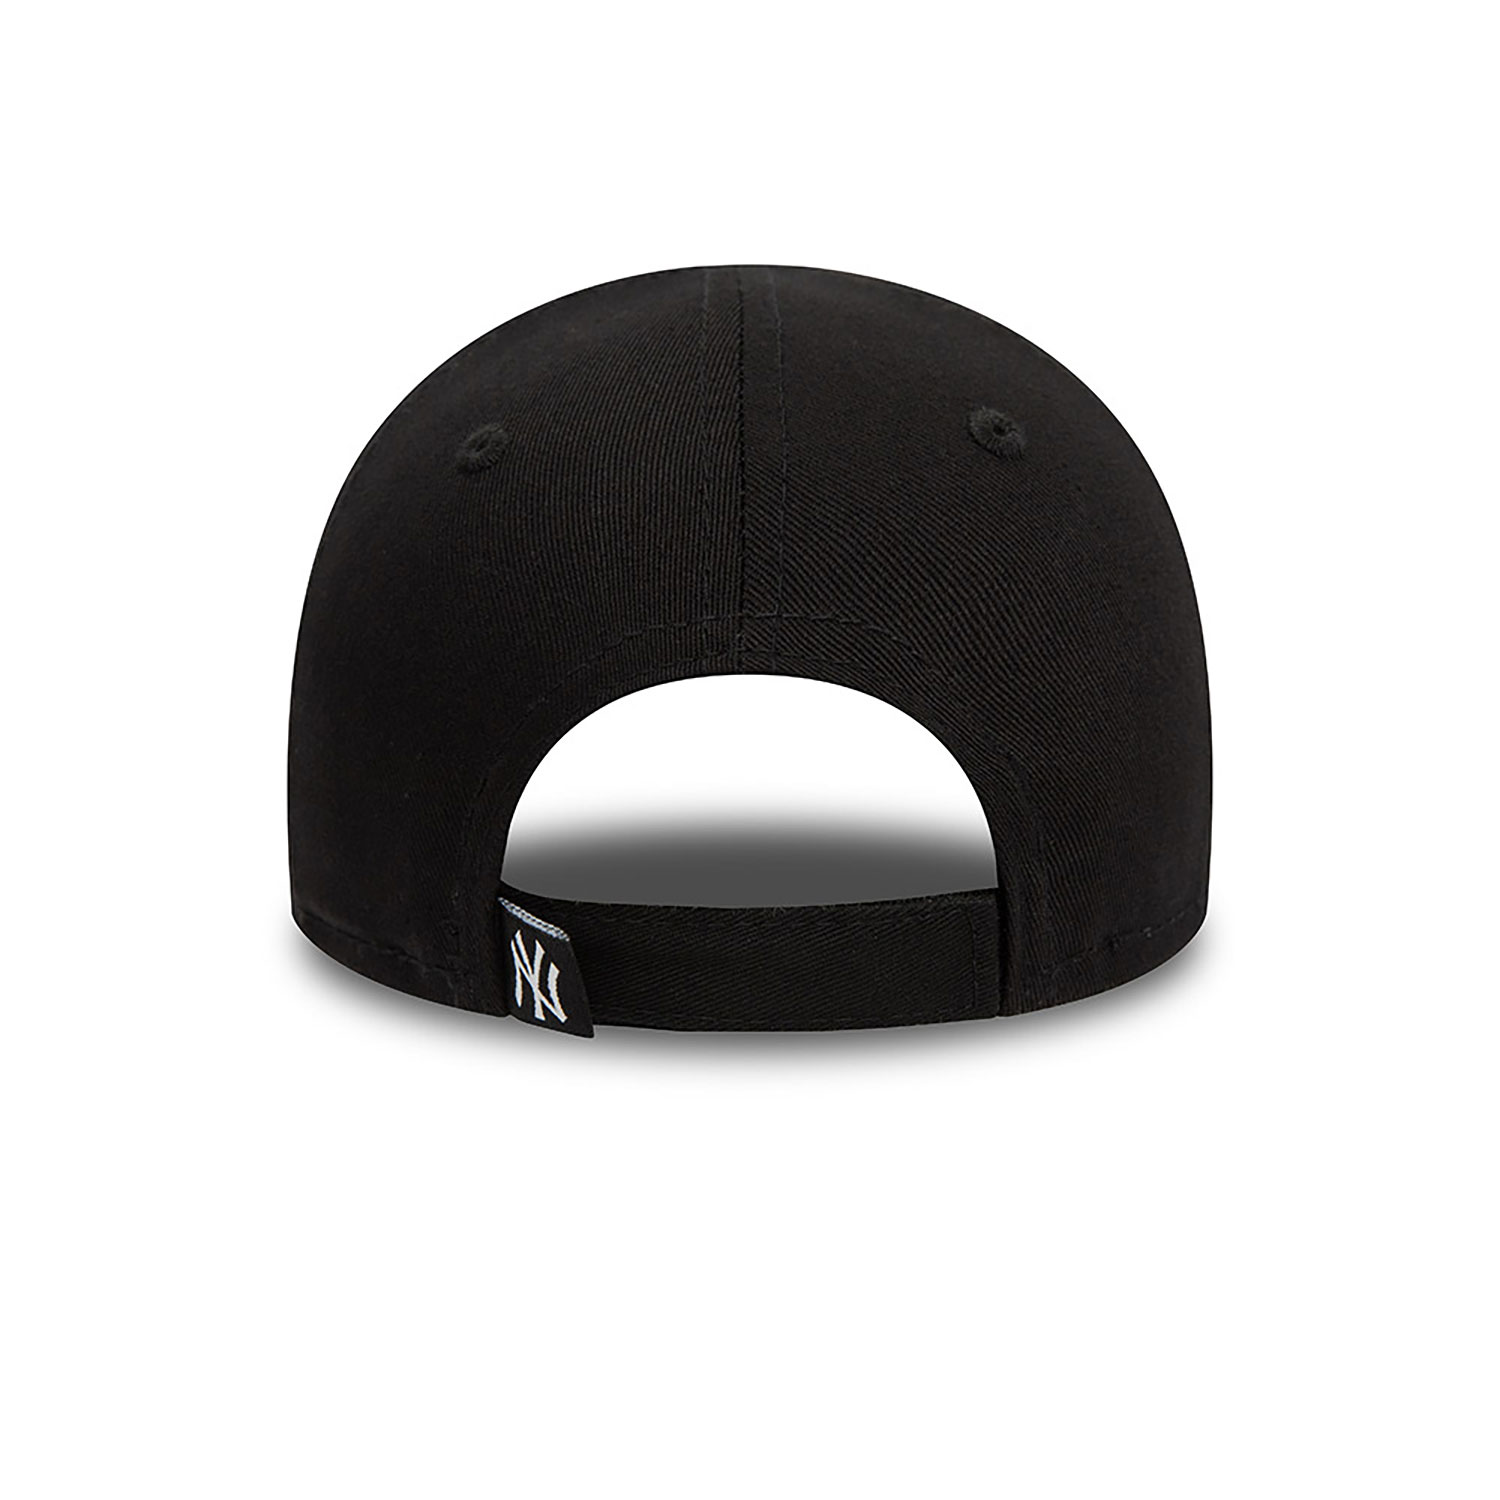 New York Yankees Toddler Icon Black 9FORTY Adjustable Cap